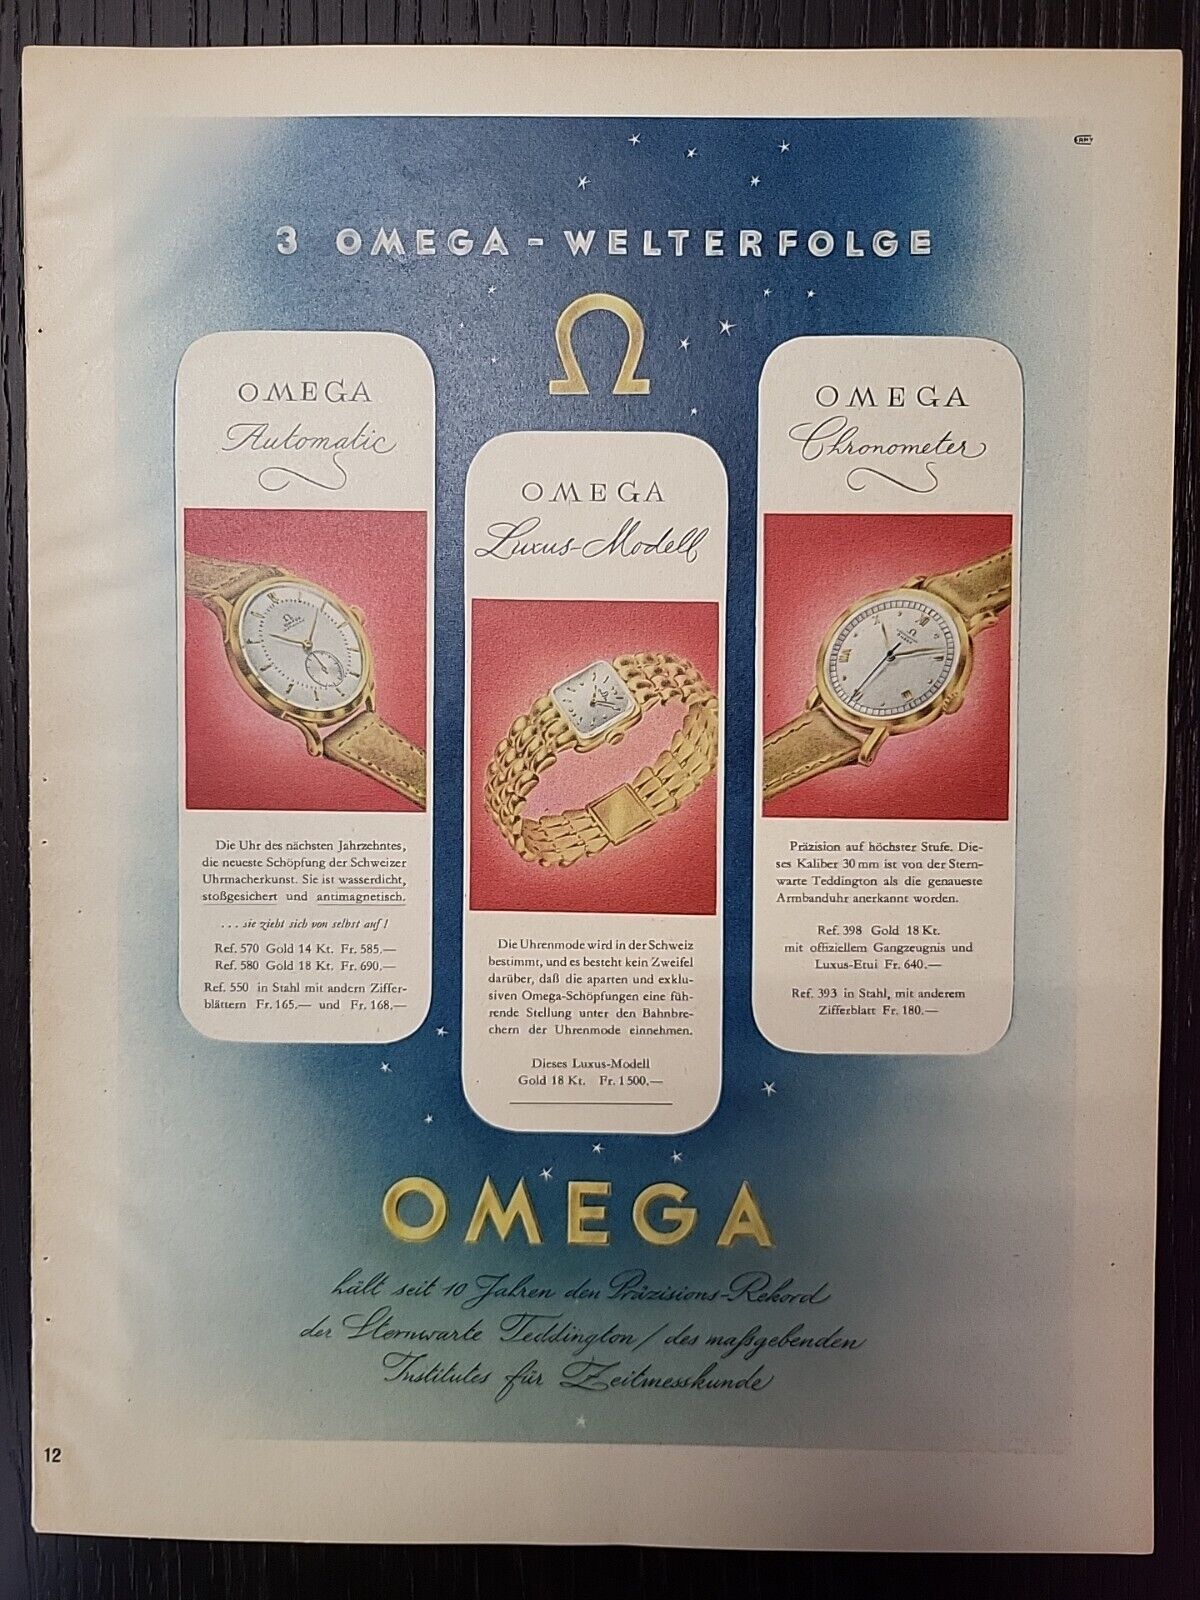 Omega Swiss Watches 1944 Print Ad Du World War 2 Luxury German Astronomy Color